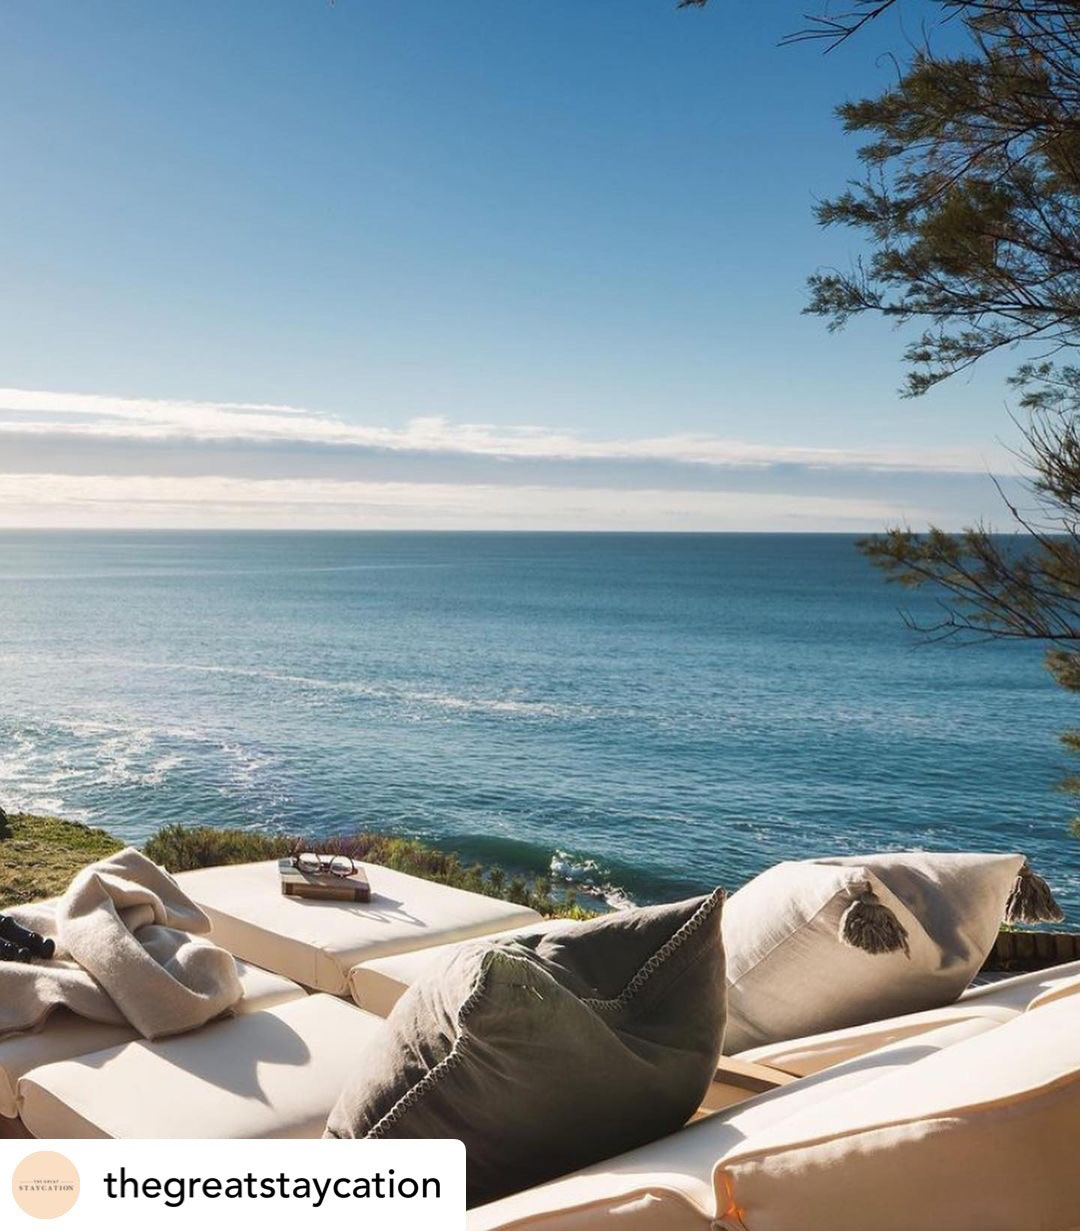 Two outdoor day beds with an sunny ocean view. Credit: The Great Staycation.